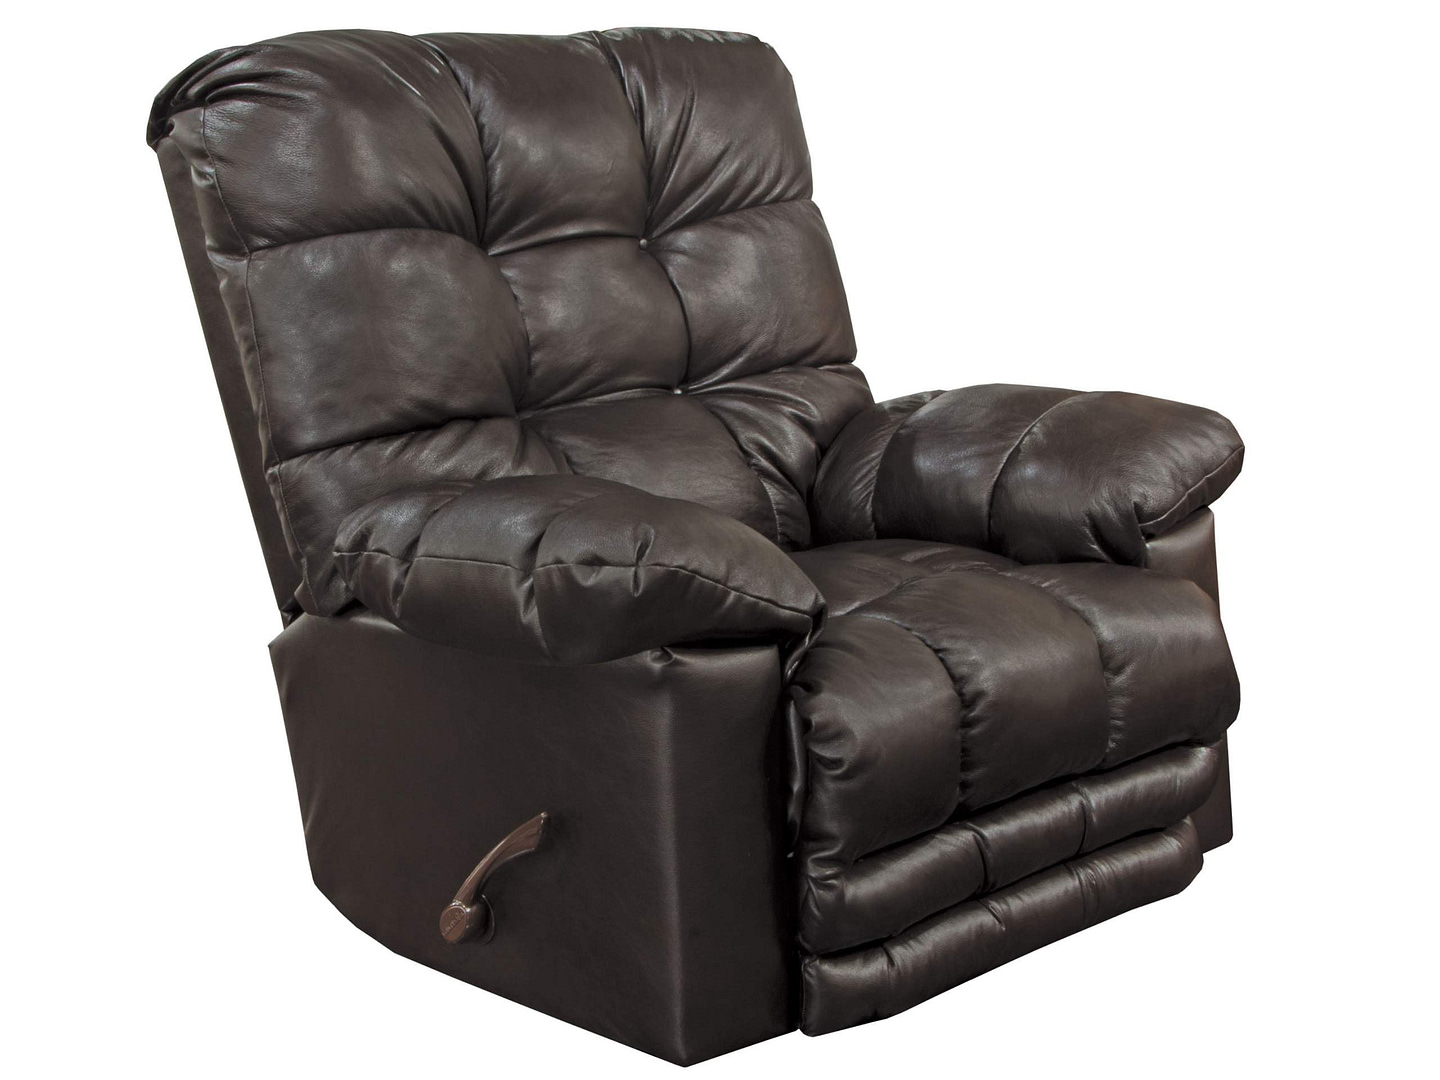 DELTA Leather Recliner Chair